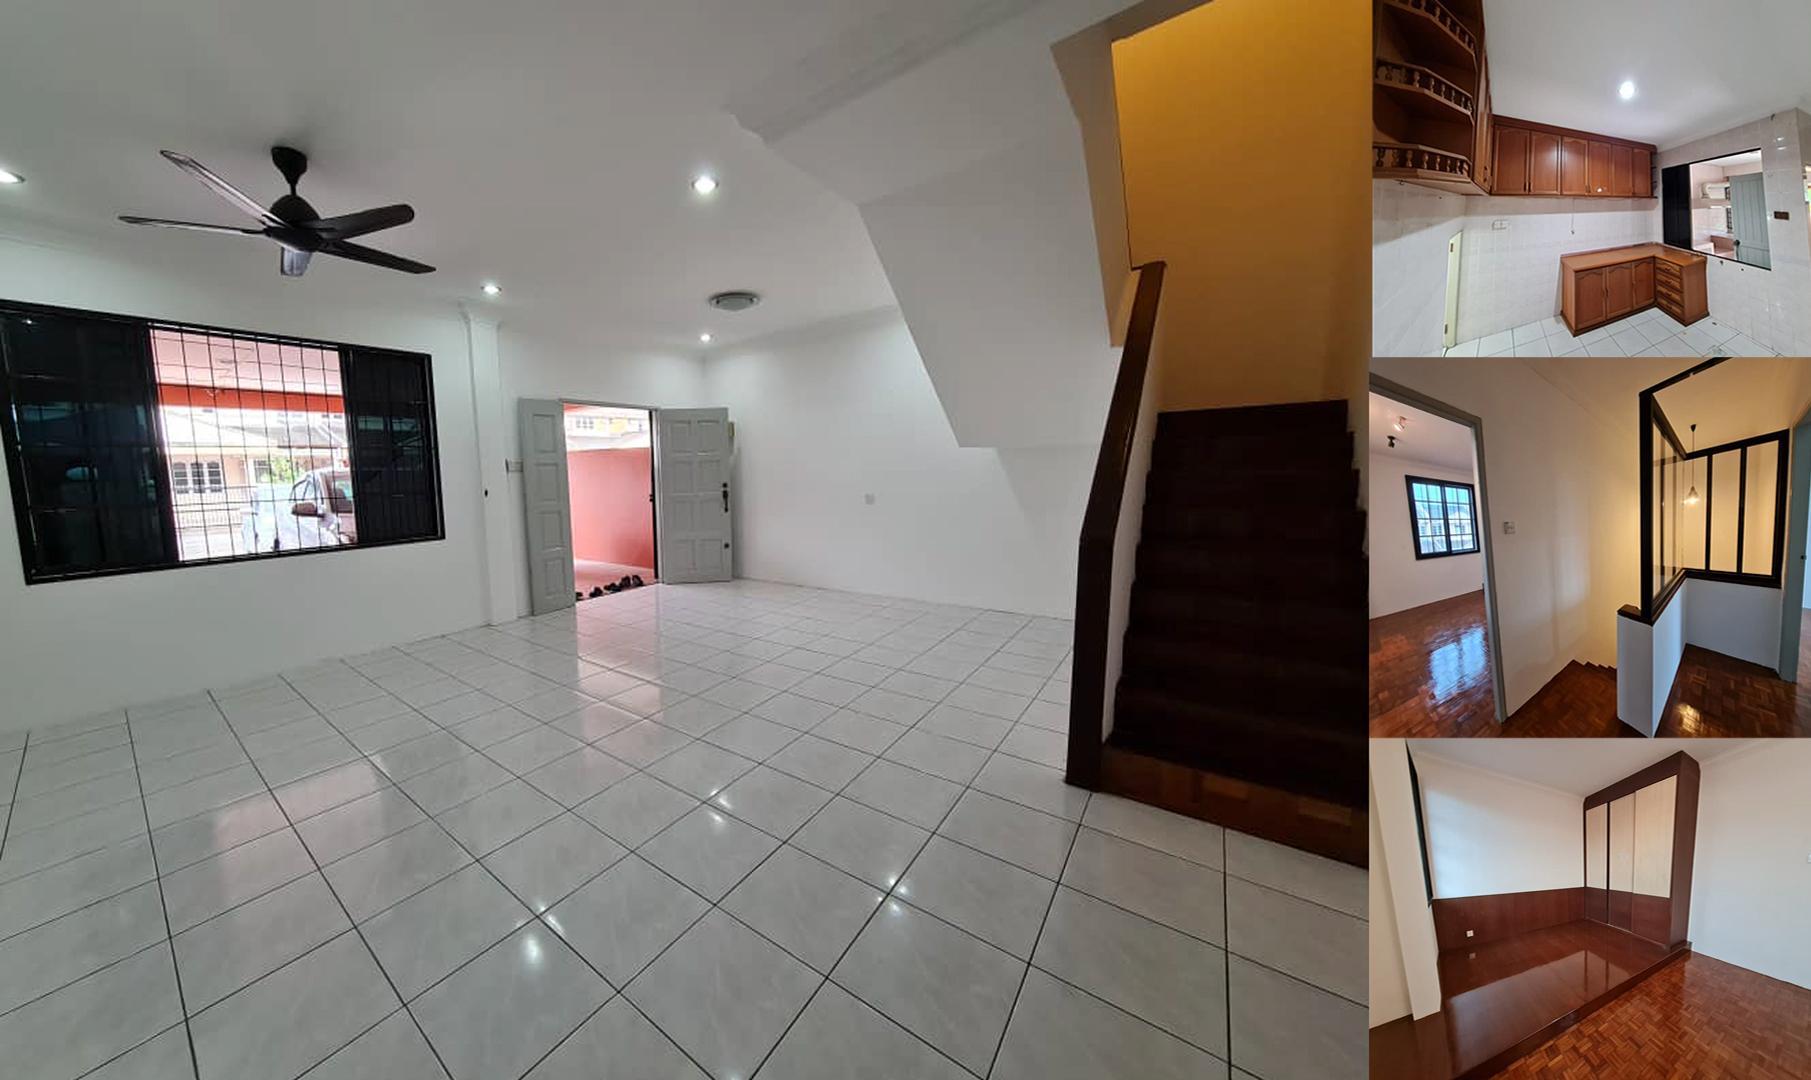 Double storey intermediate for Sale! Located at Stapok (near to badminton court)